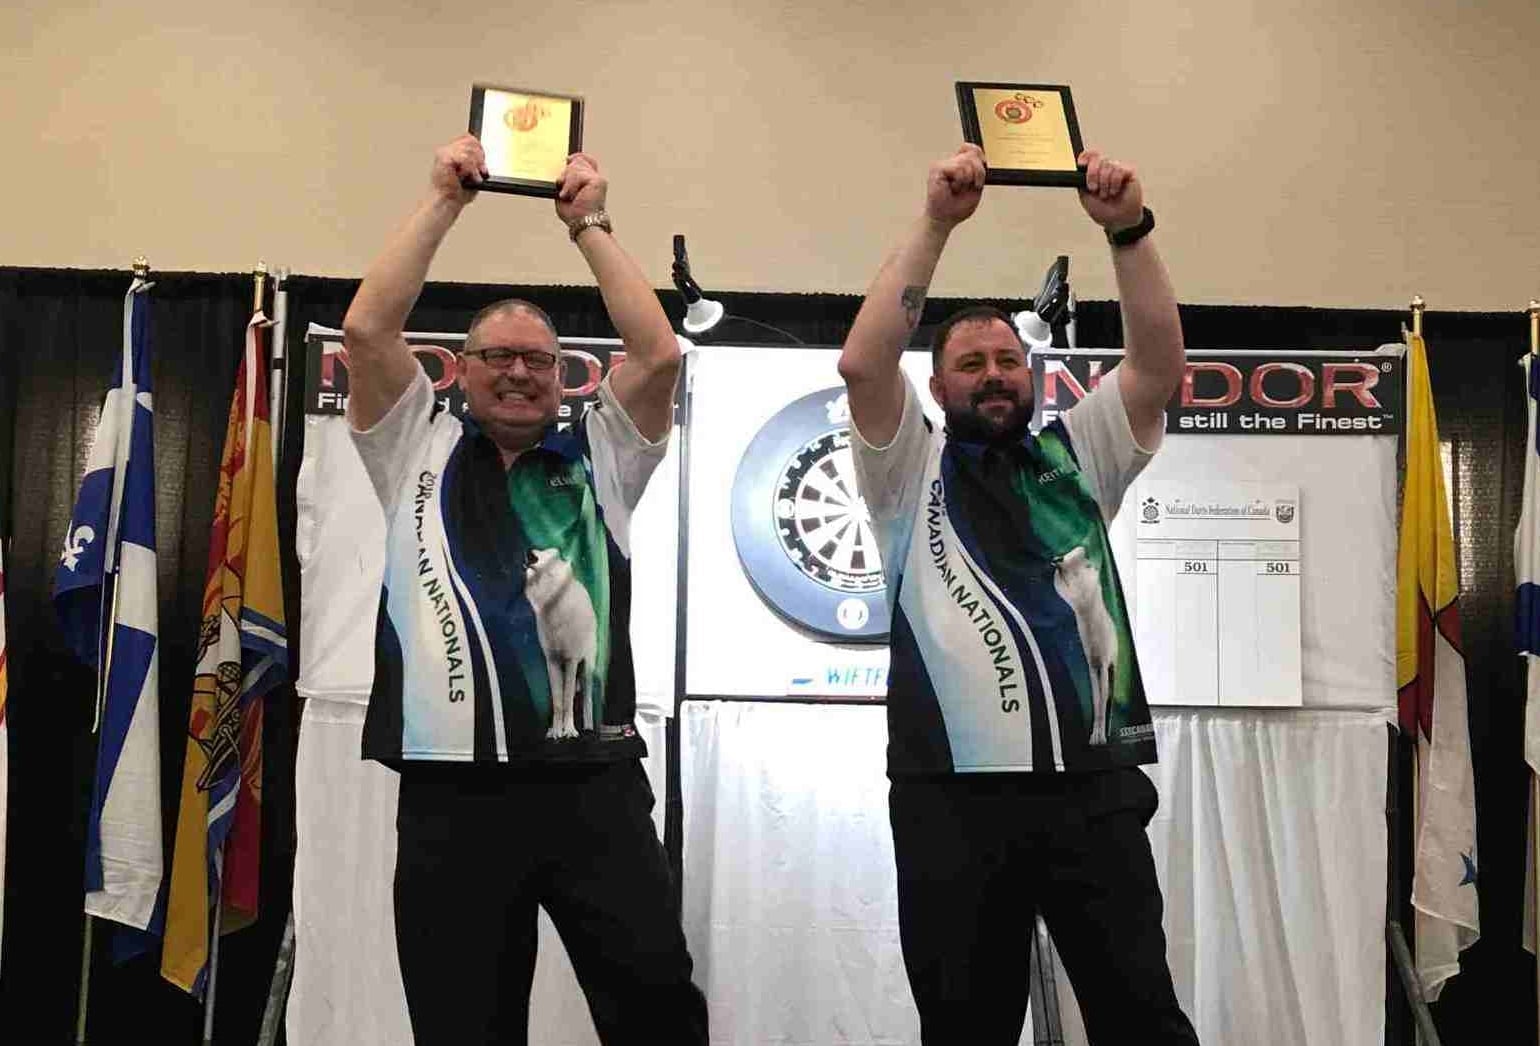 Elvis Beaudoin, left, and Keith Way hoist the champions plaques after winning the mens doubles title at the Adult National Darts Championships in Saskatoon in 2019. It was the first national title ever in darts for the NWT. photo courtesy of Sheh Murillo